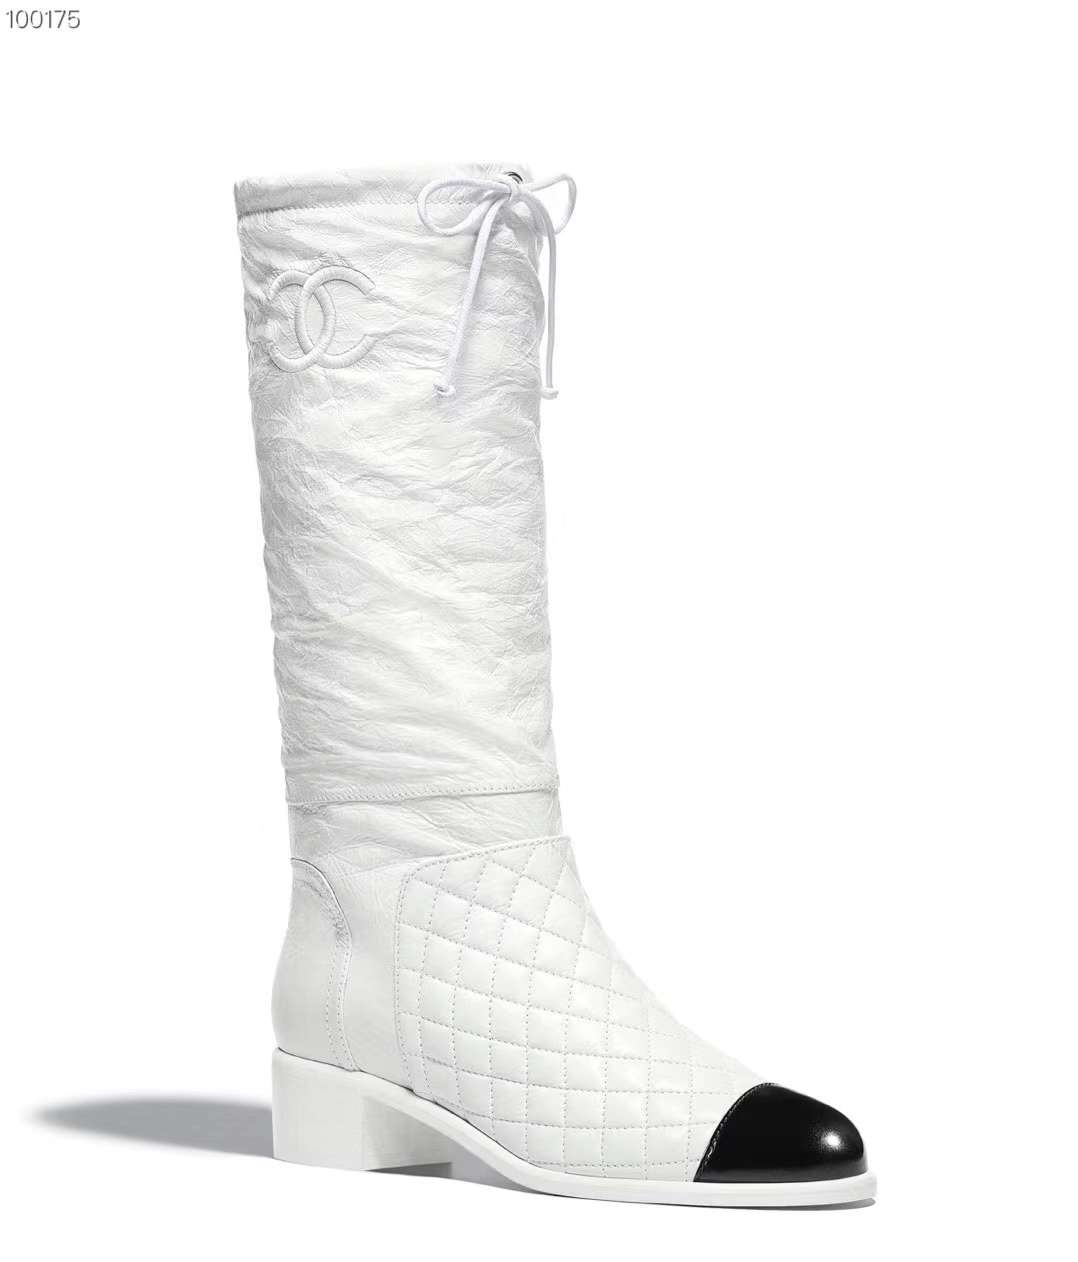 2019 NEW Chanel Real leather shoes Chanel 100175 white - Click Image to Close